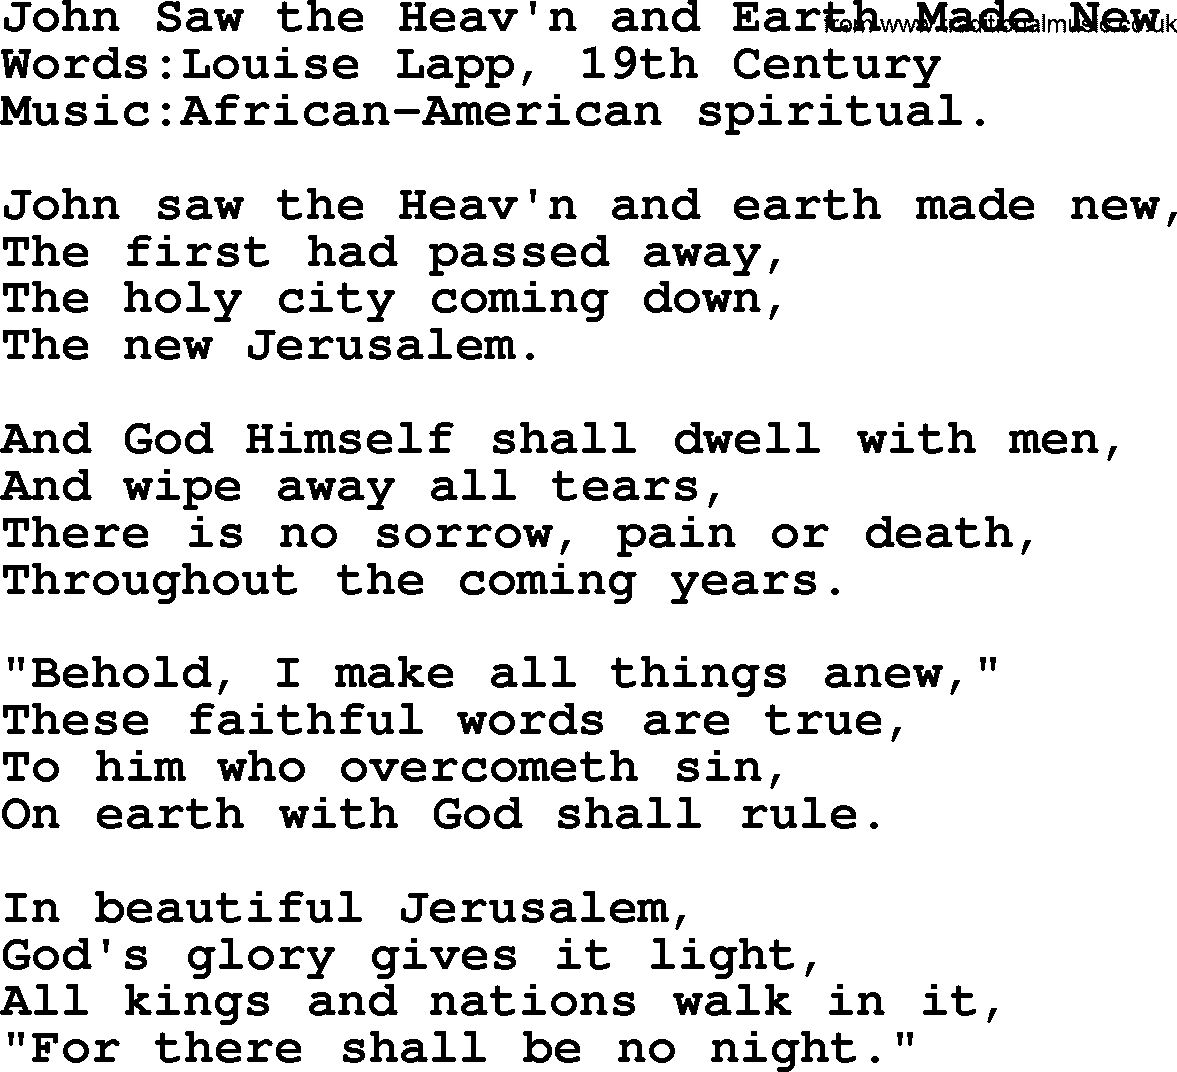 Songs and Hymns about Heaven: John Saw The Heav'n And Earth Made New lyrics with PDF